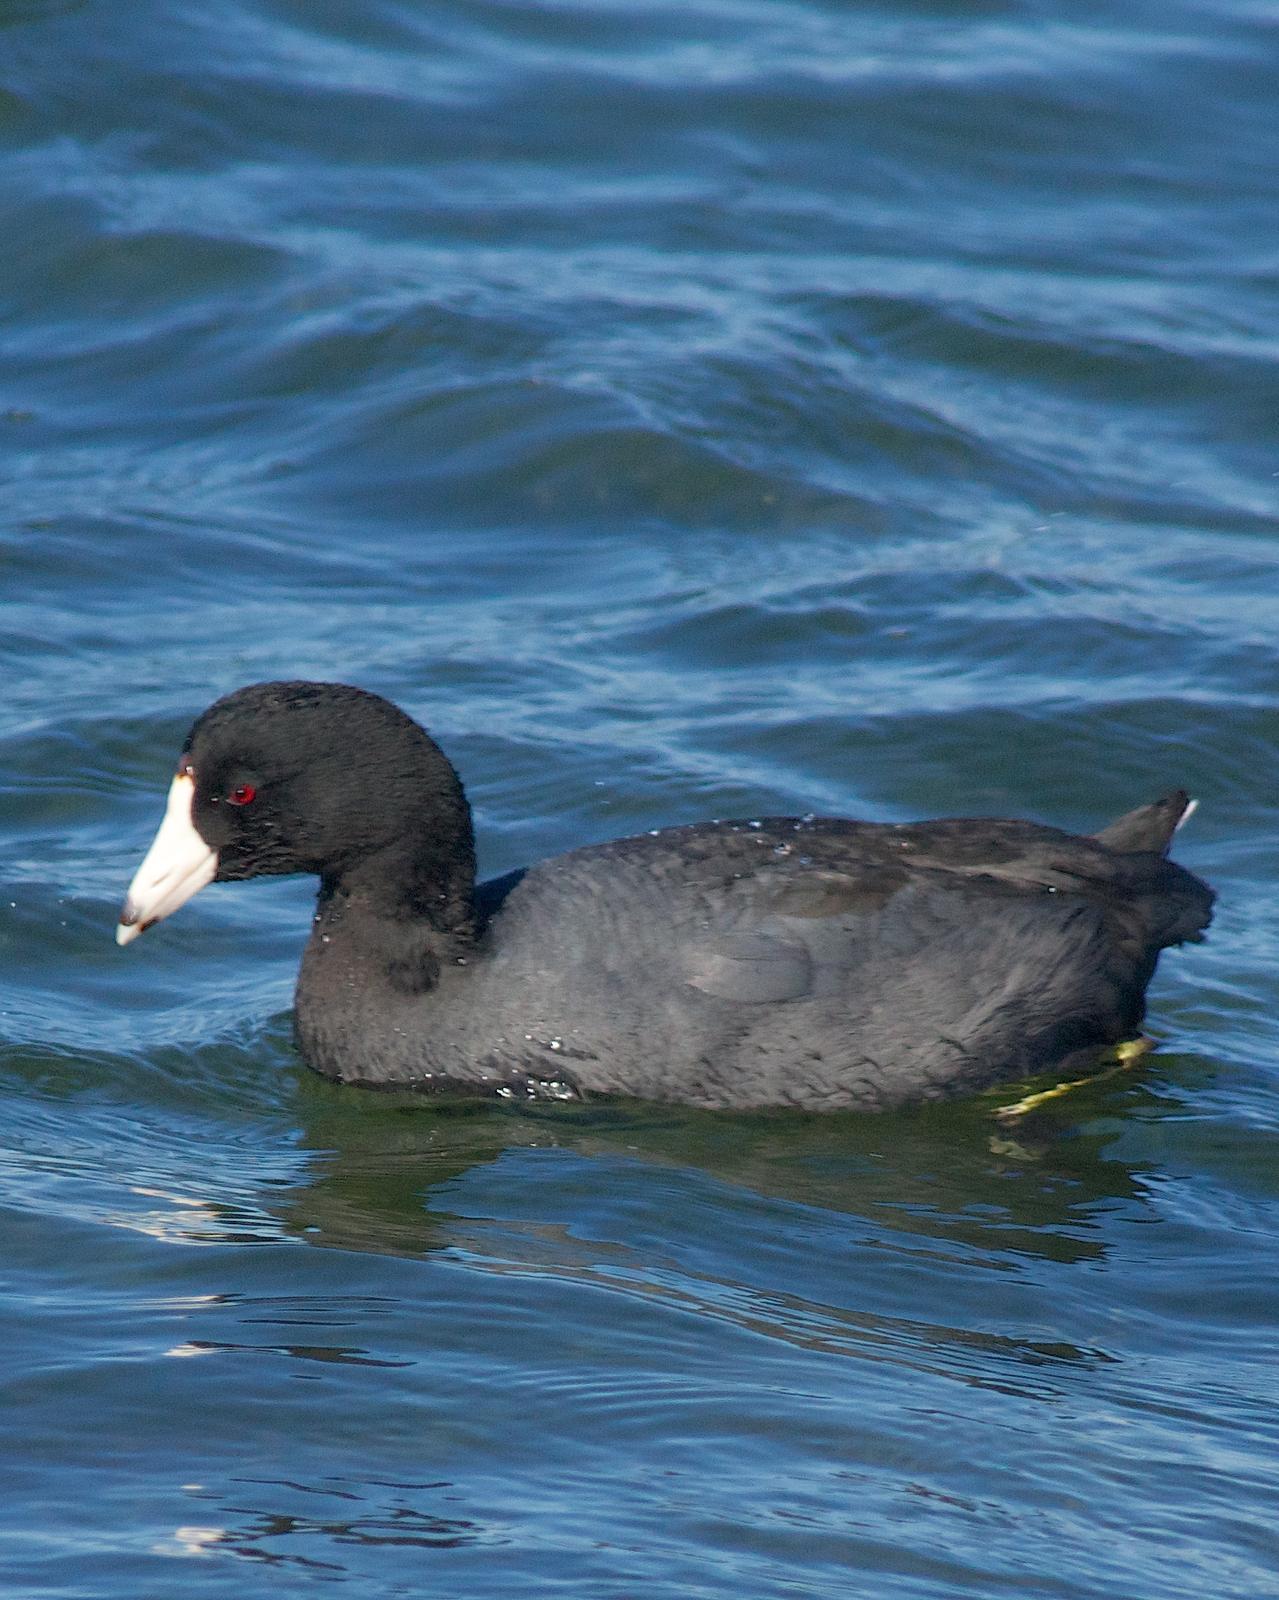 American Coot Photo by Gerald Hoekstra